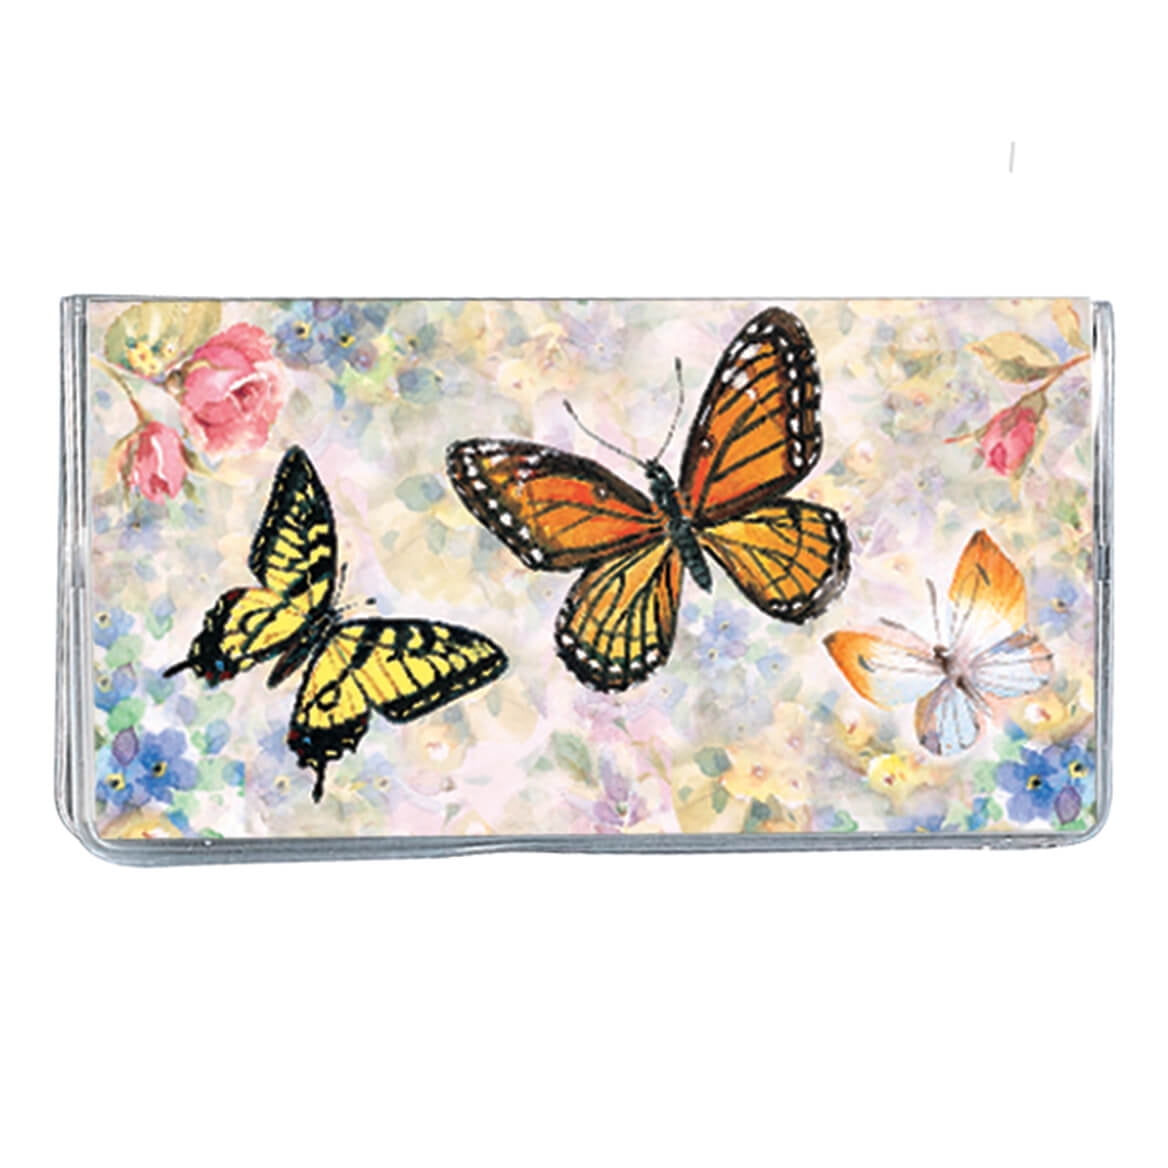 Butterfly Two Year Planner Pocket Sized Calendar Ideal for Purses